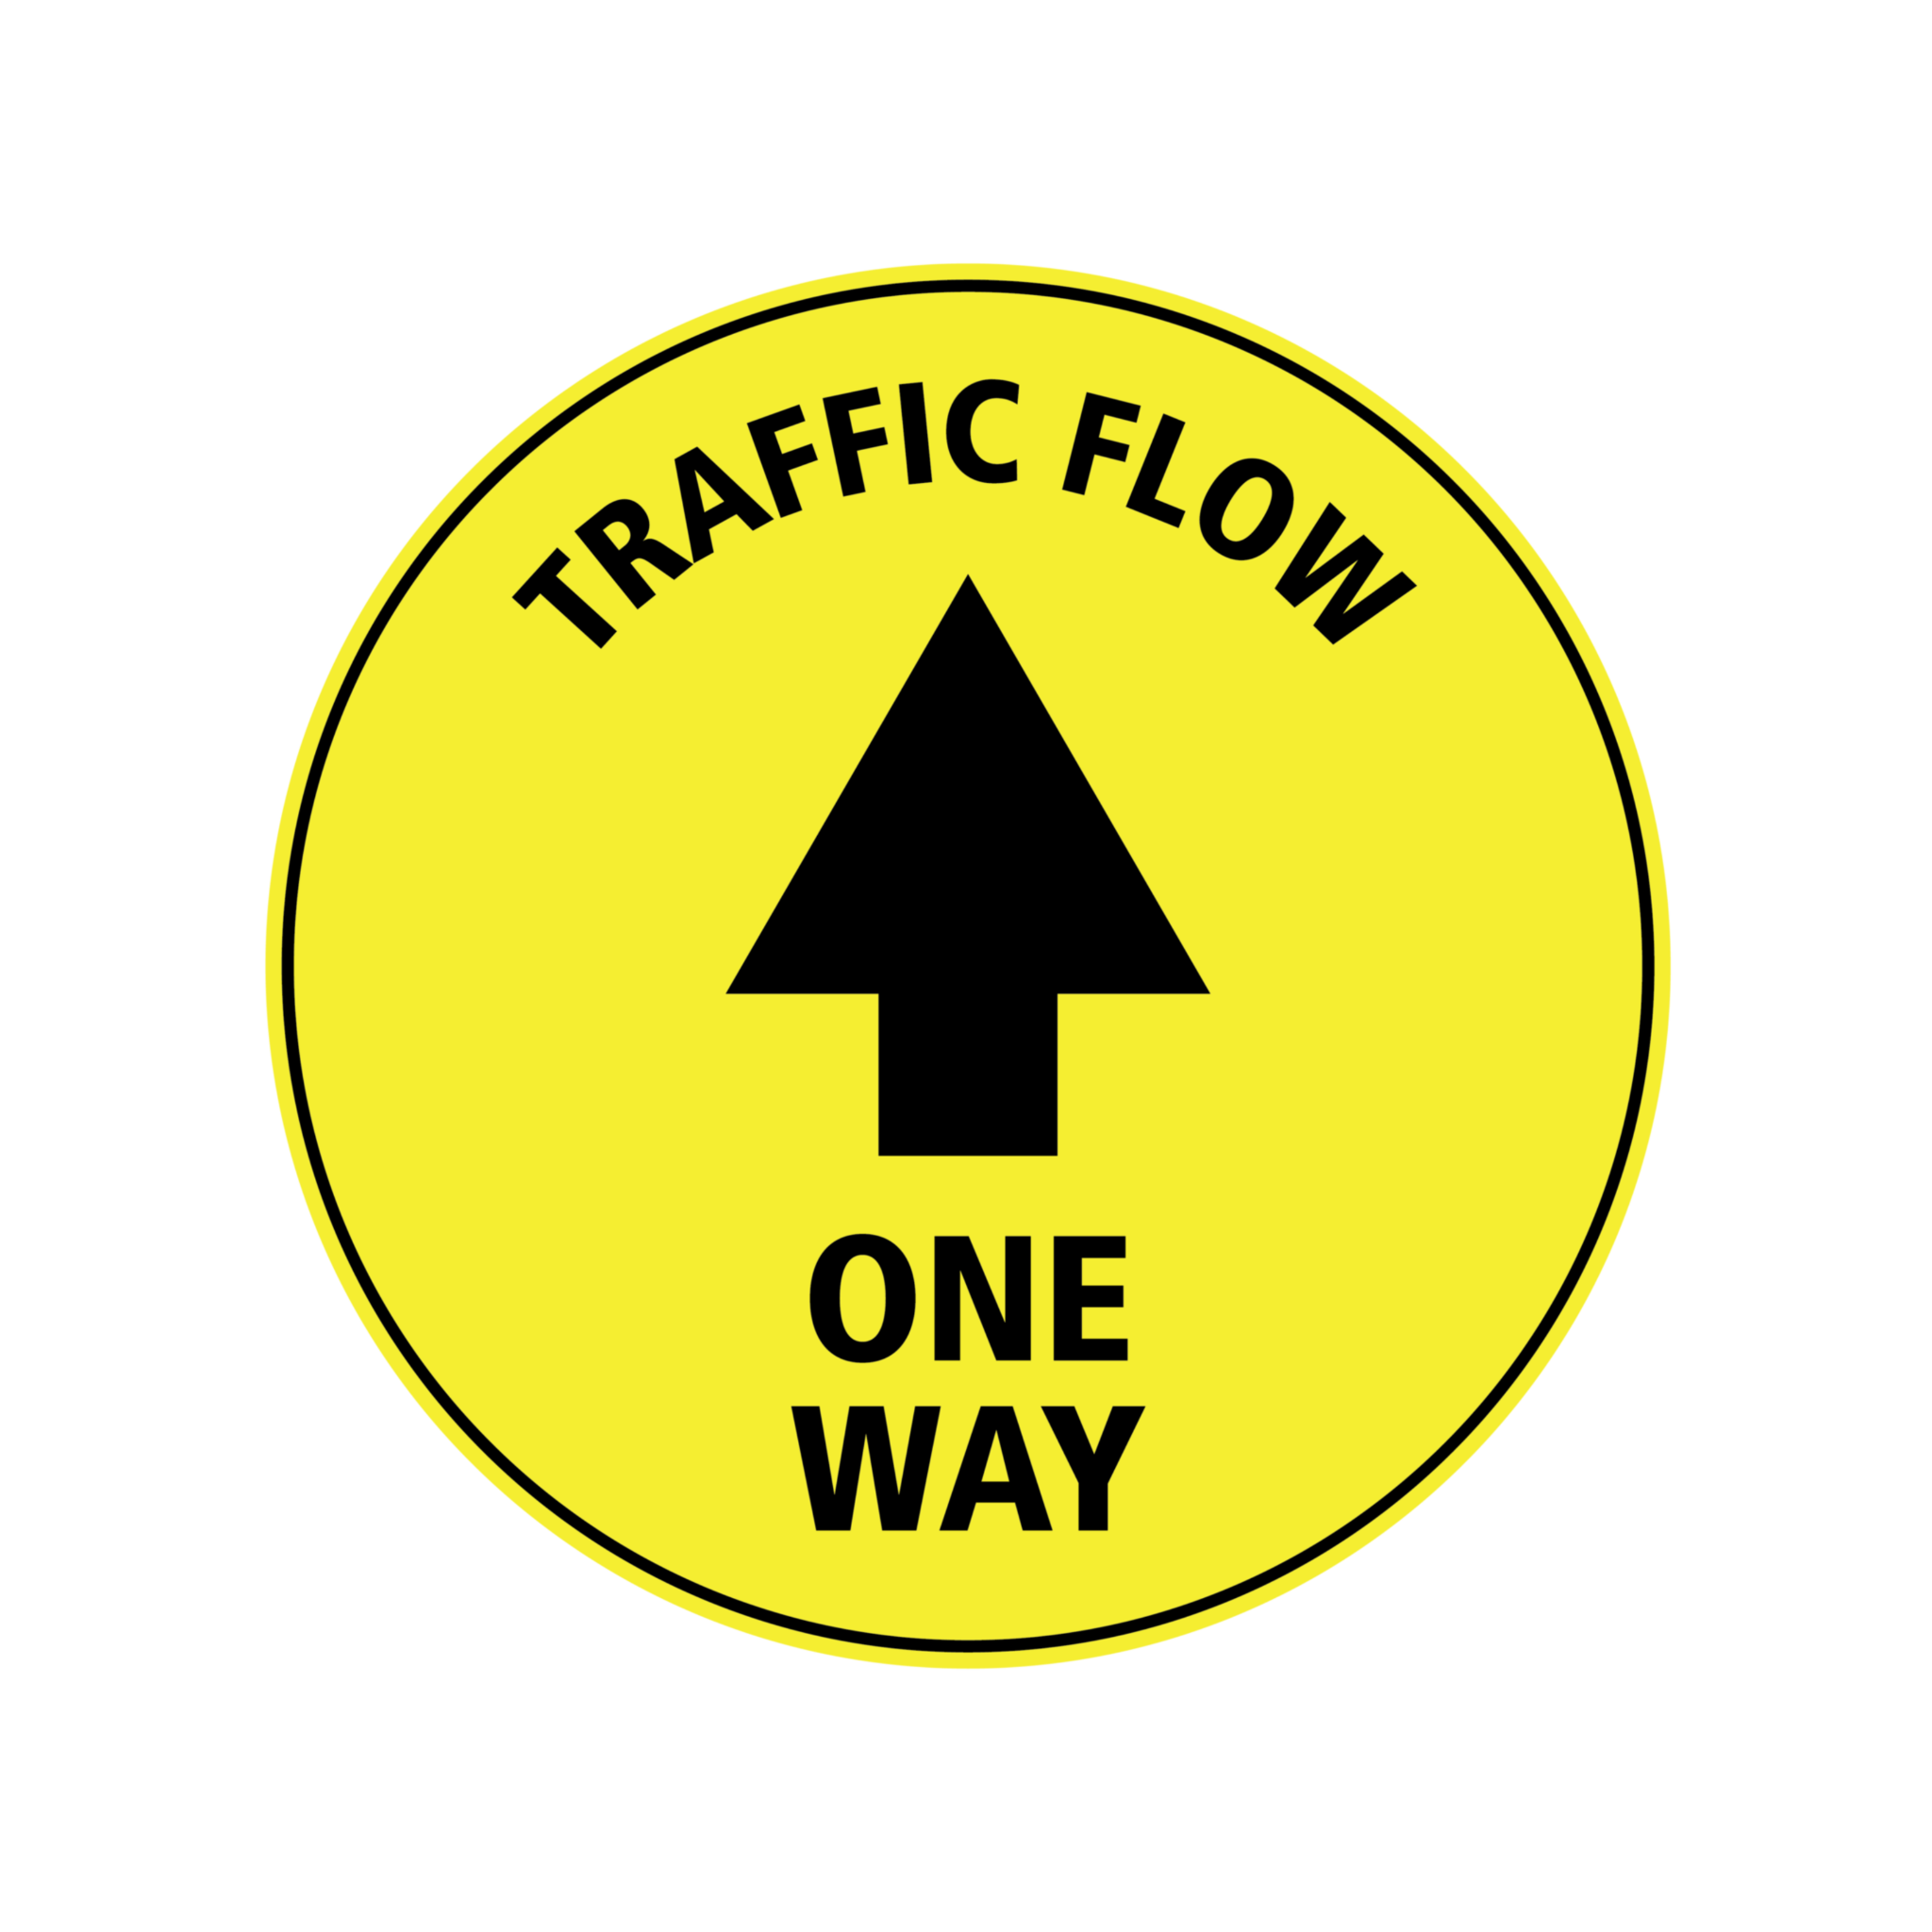 TRAFFIC FLOW - ONE WAY - CYANvisuals